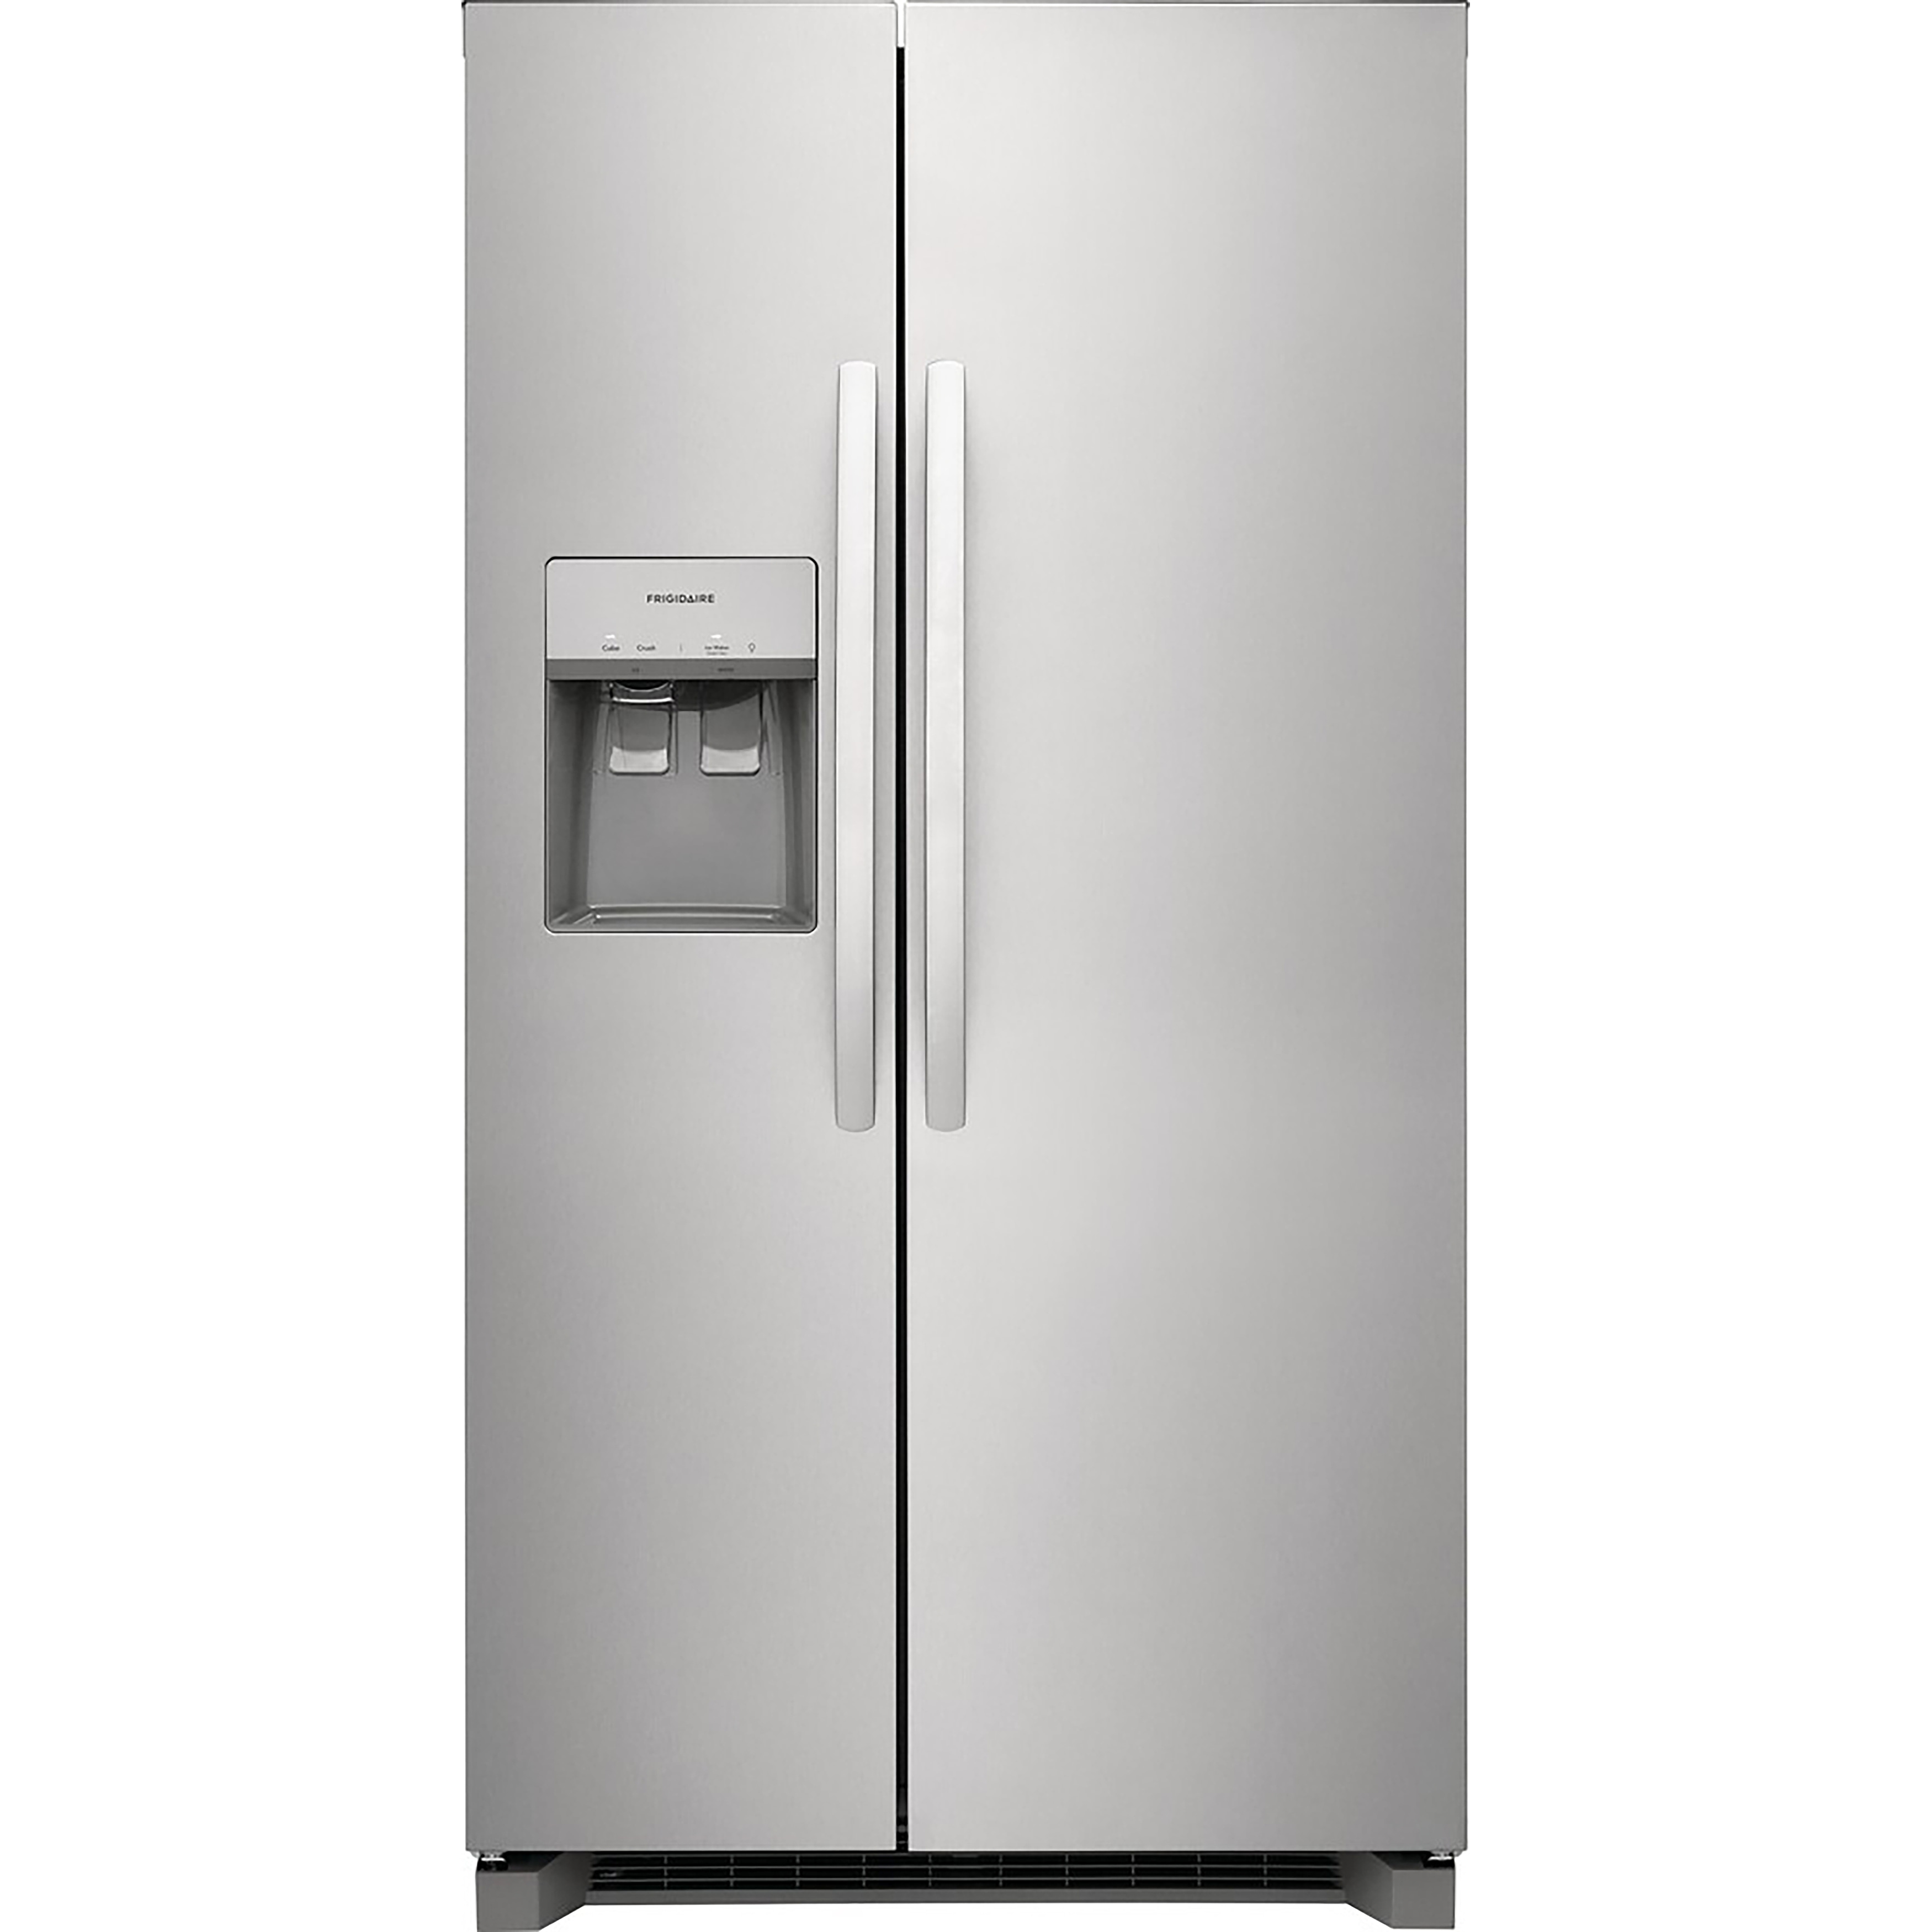 Frigidaire FRSC2333AS 22.3 Cu. Ft. 36 inch Counter Depth Side by Side Refrigerator - Stainless Steel